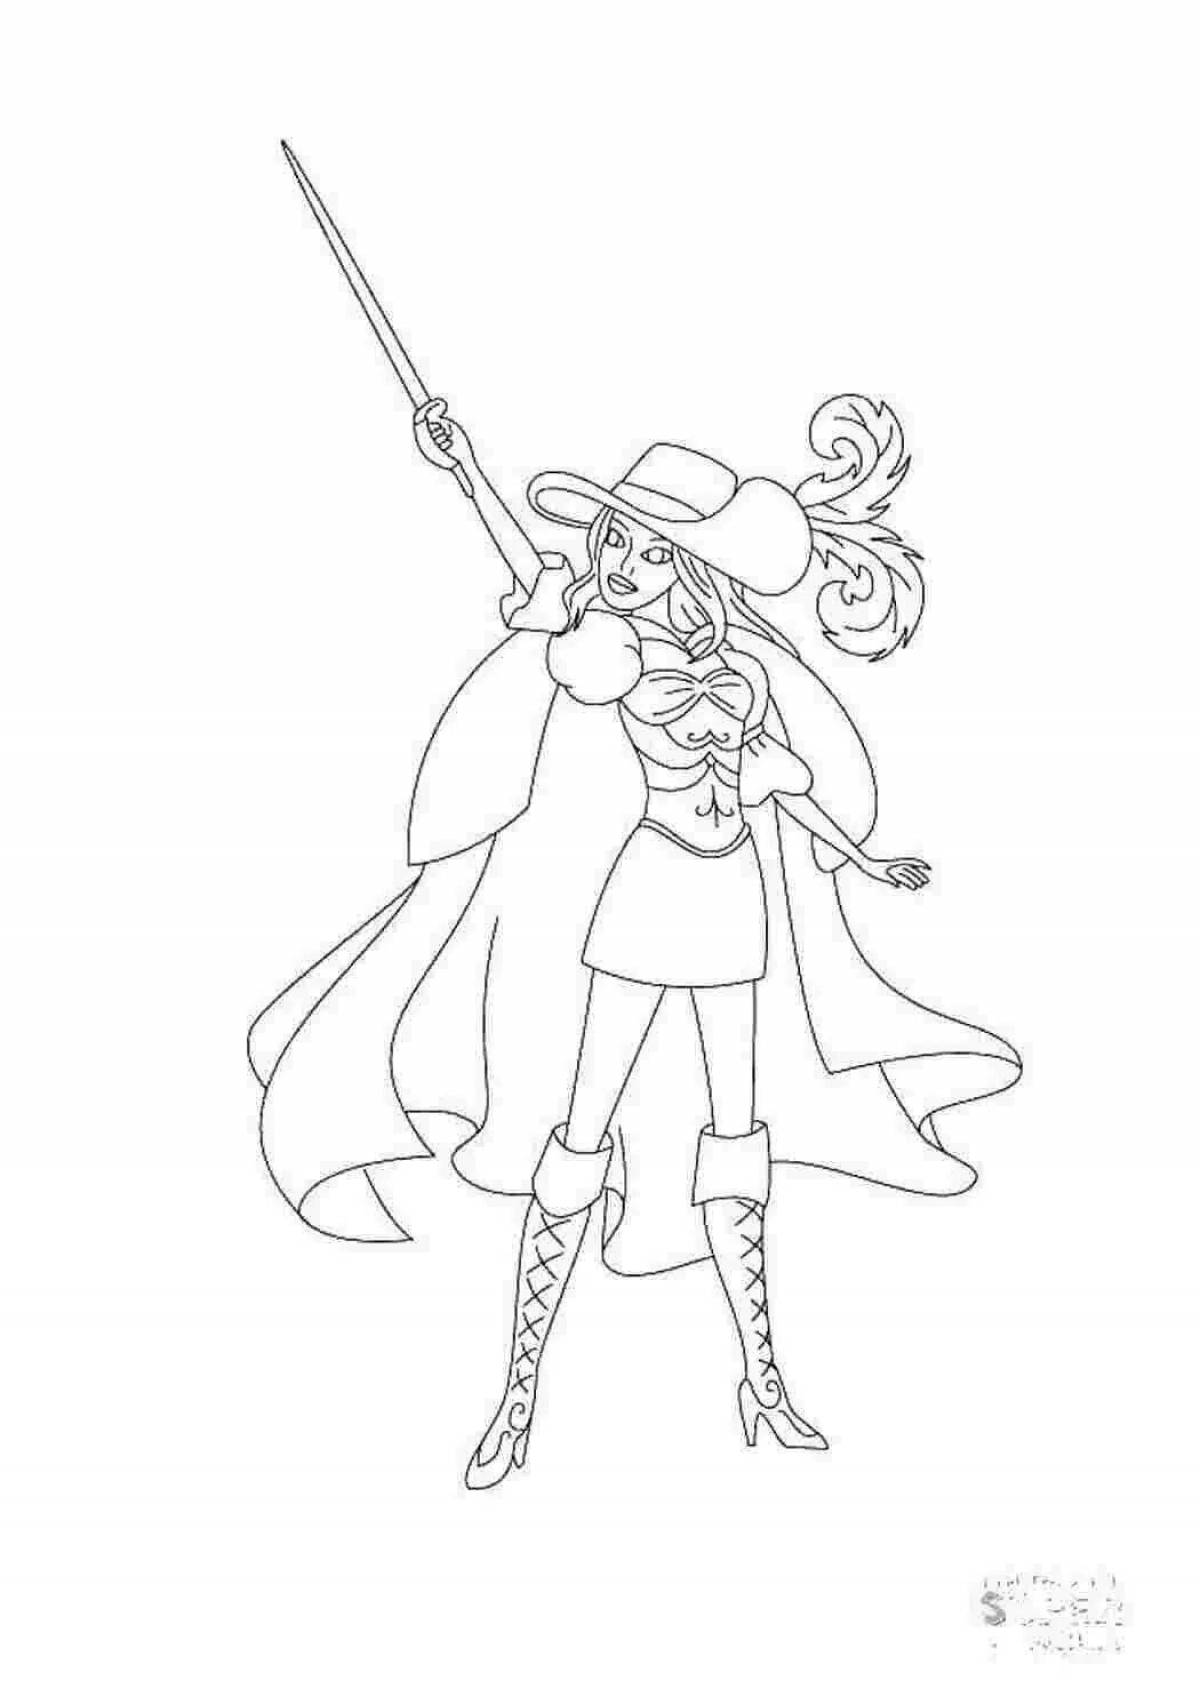 Fine Musketeers coloring page